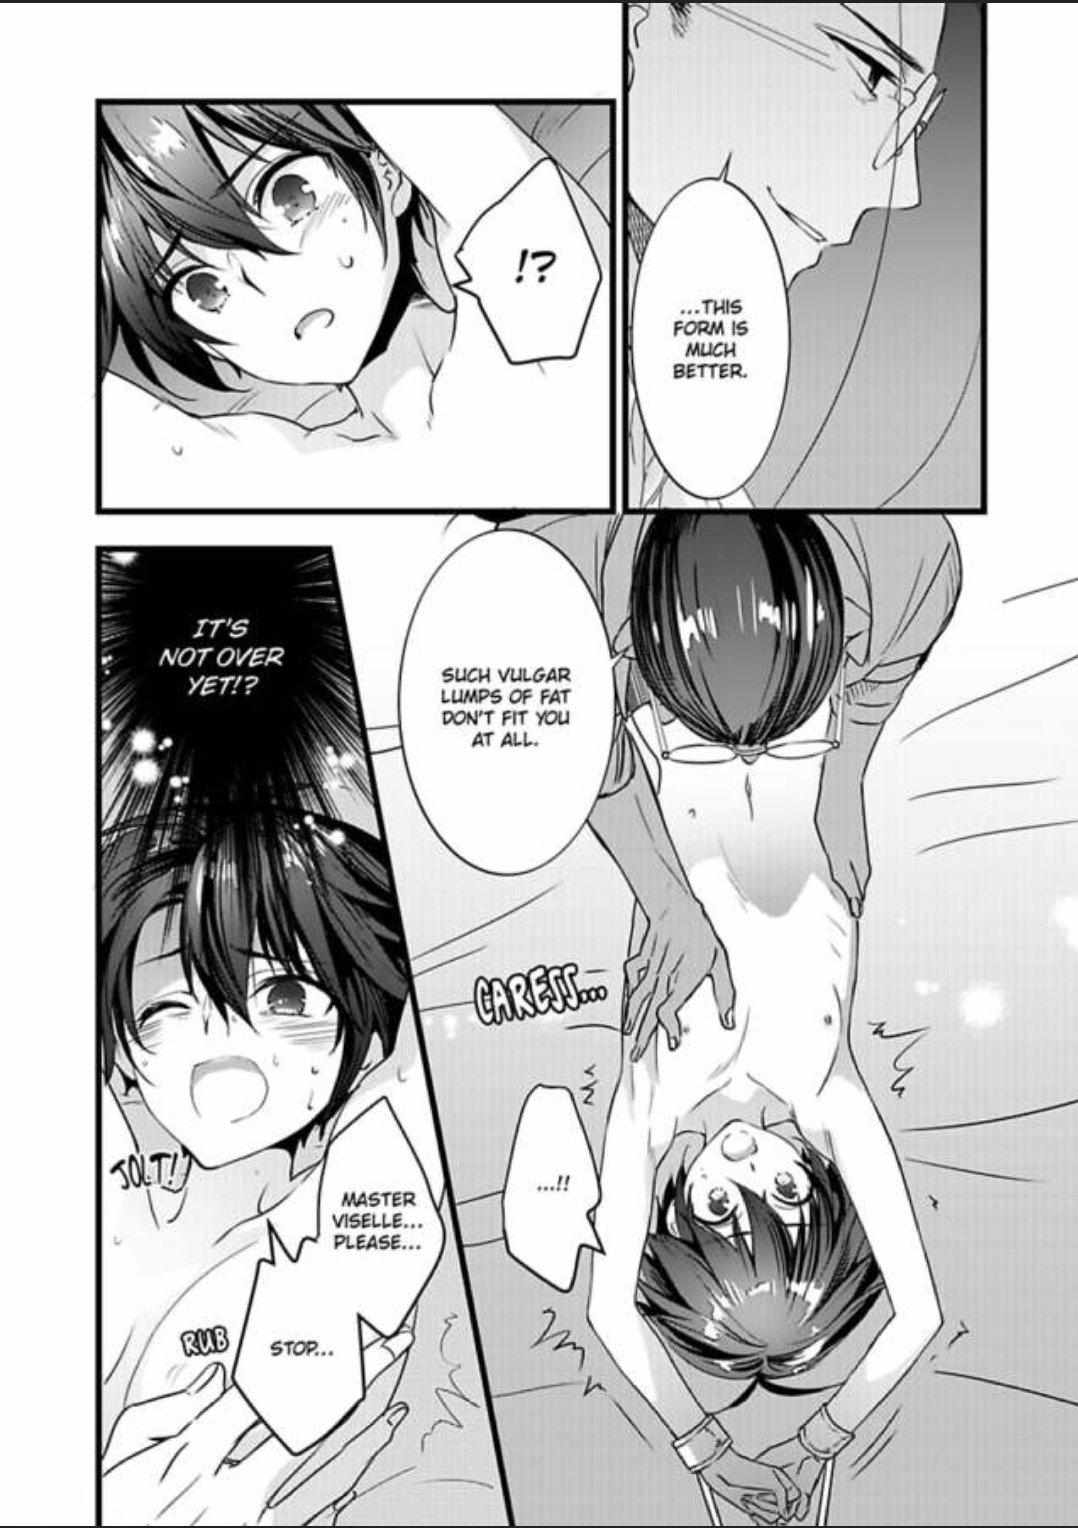 I Turned into a Girl and Turned on All the Knights! -I Need to Have Sex to Turn Back!- - chapter 16 - #2